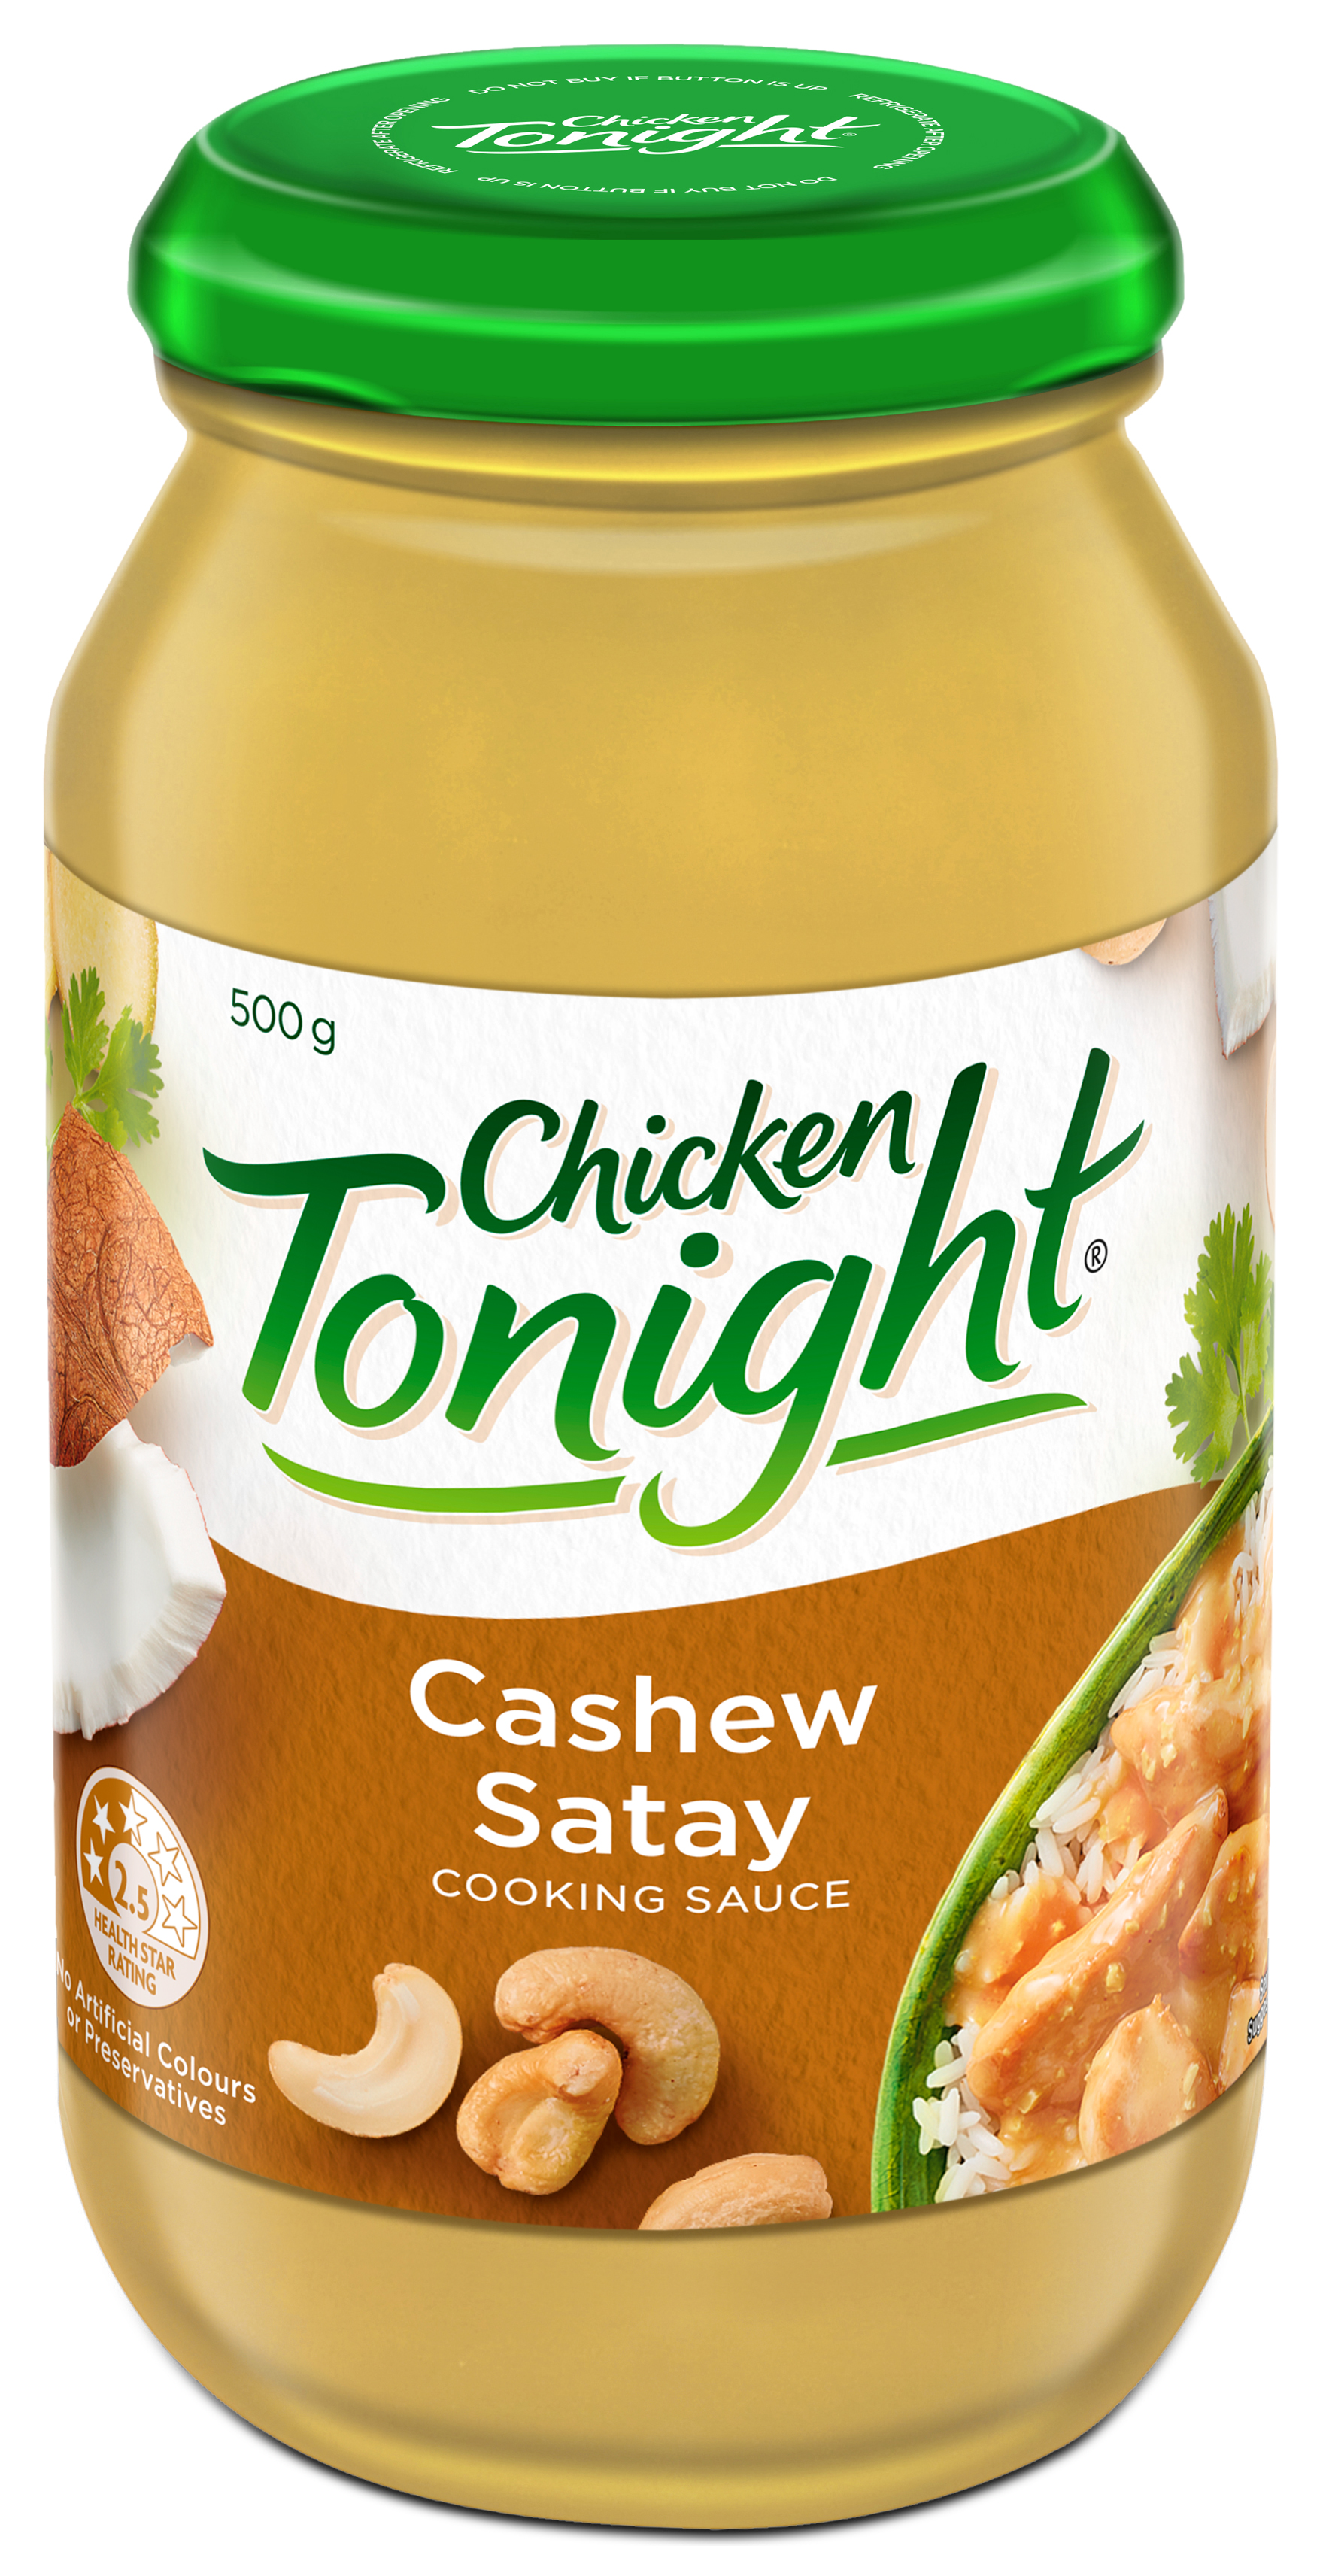 Photo of Chicken Tonight brand Cashew Satay cooking sauce in a glass jar.